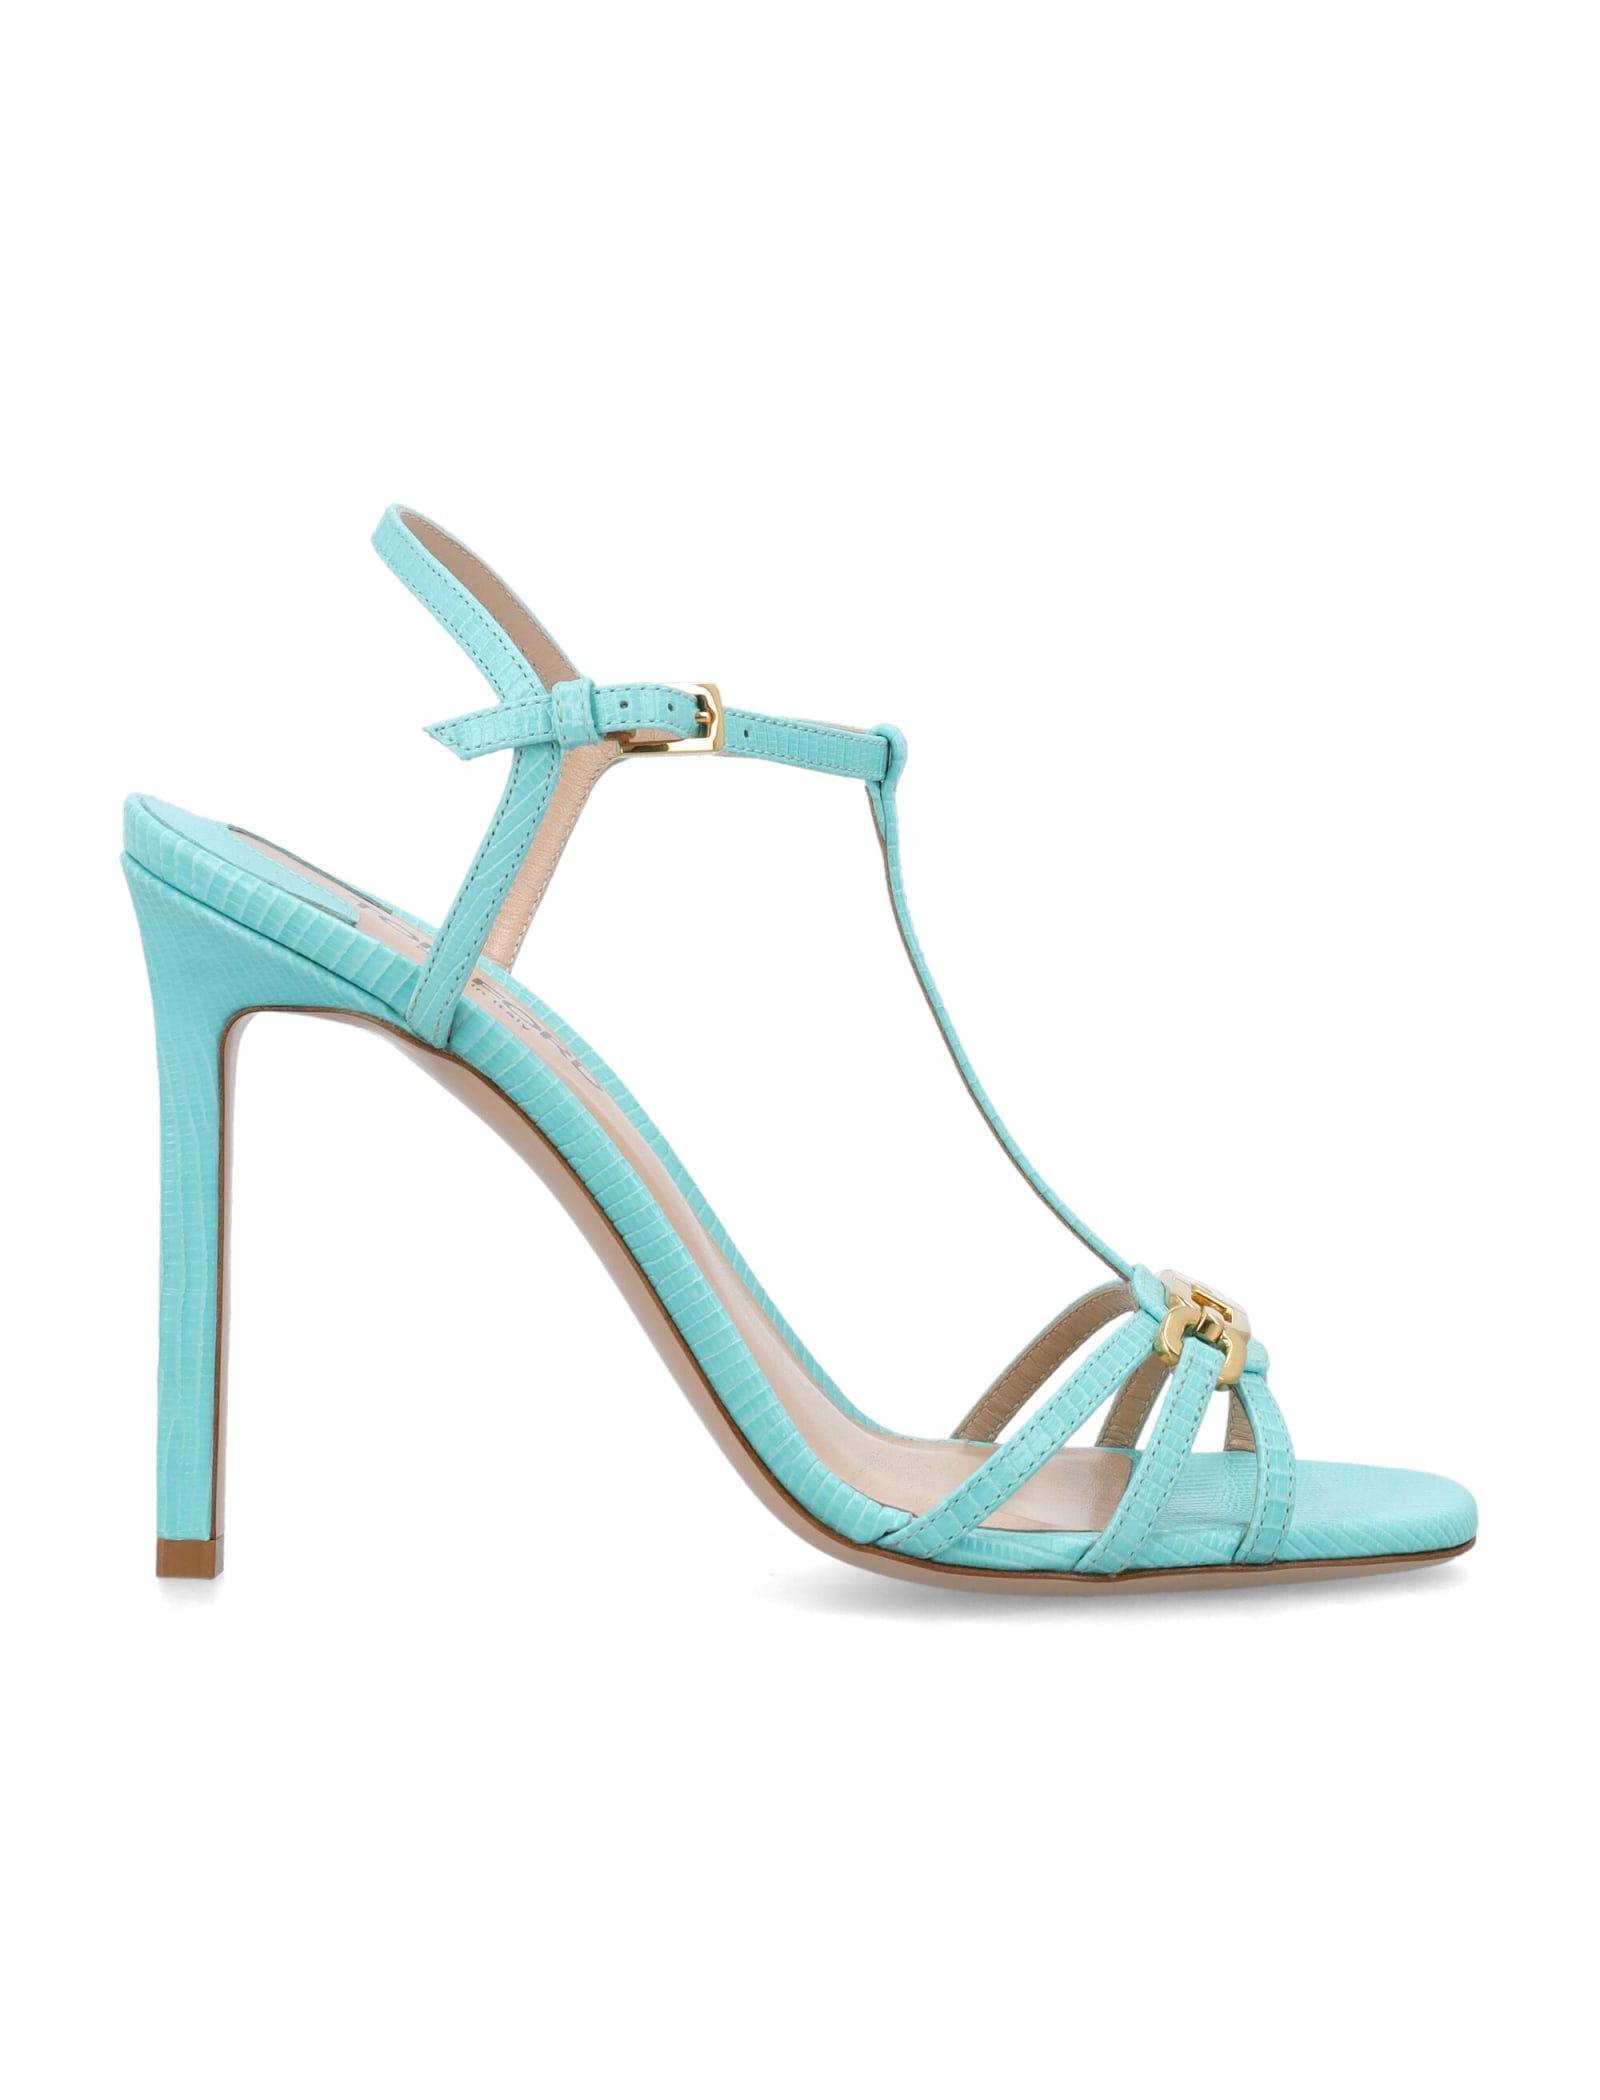 Stamped Lizard Leather Whitney Sandal